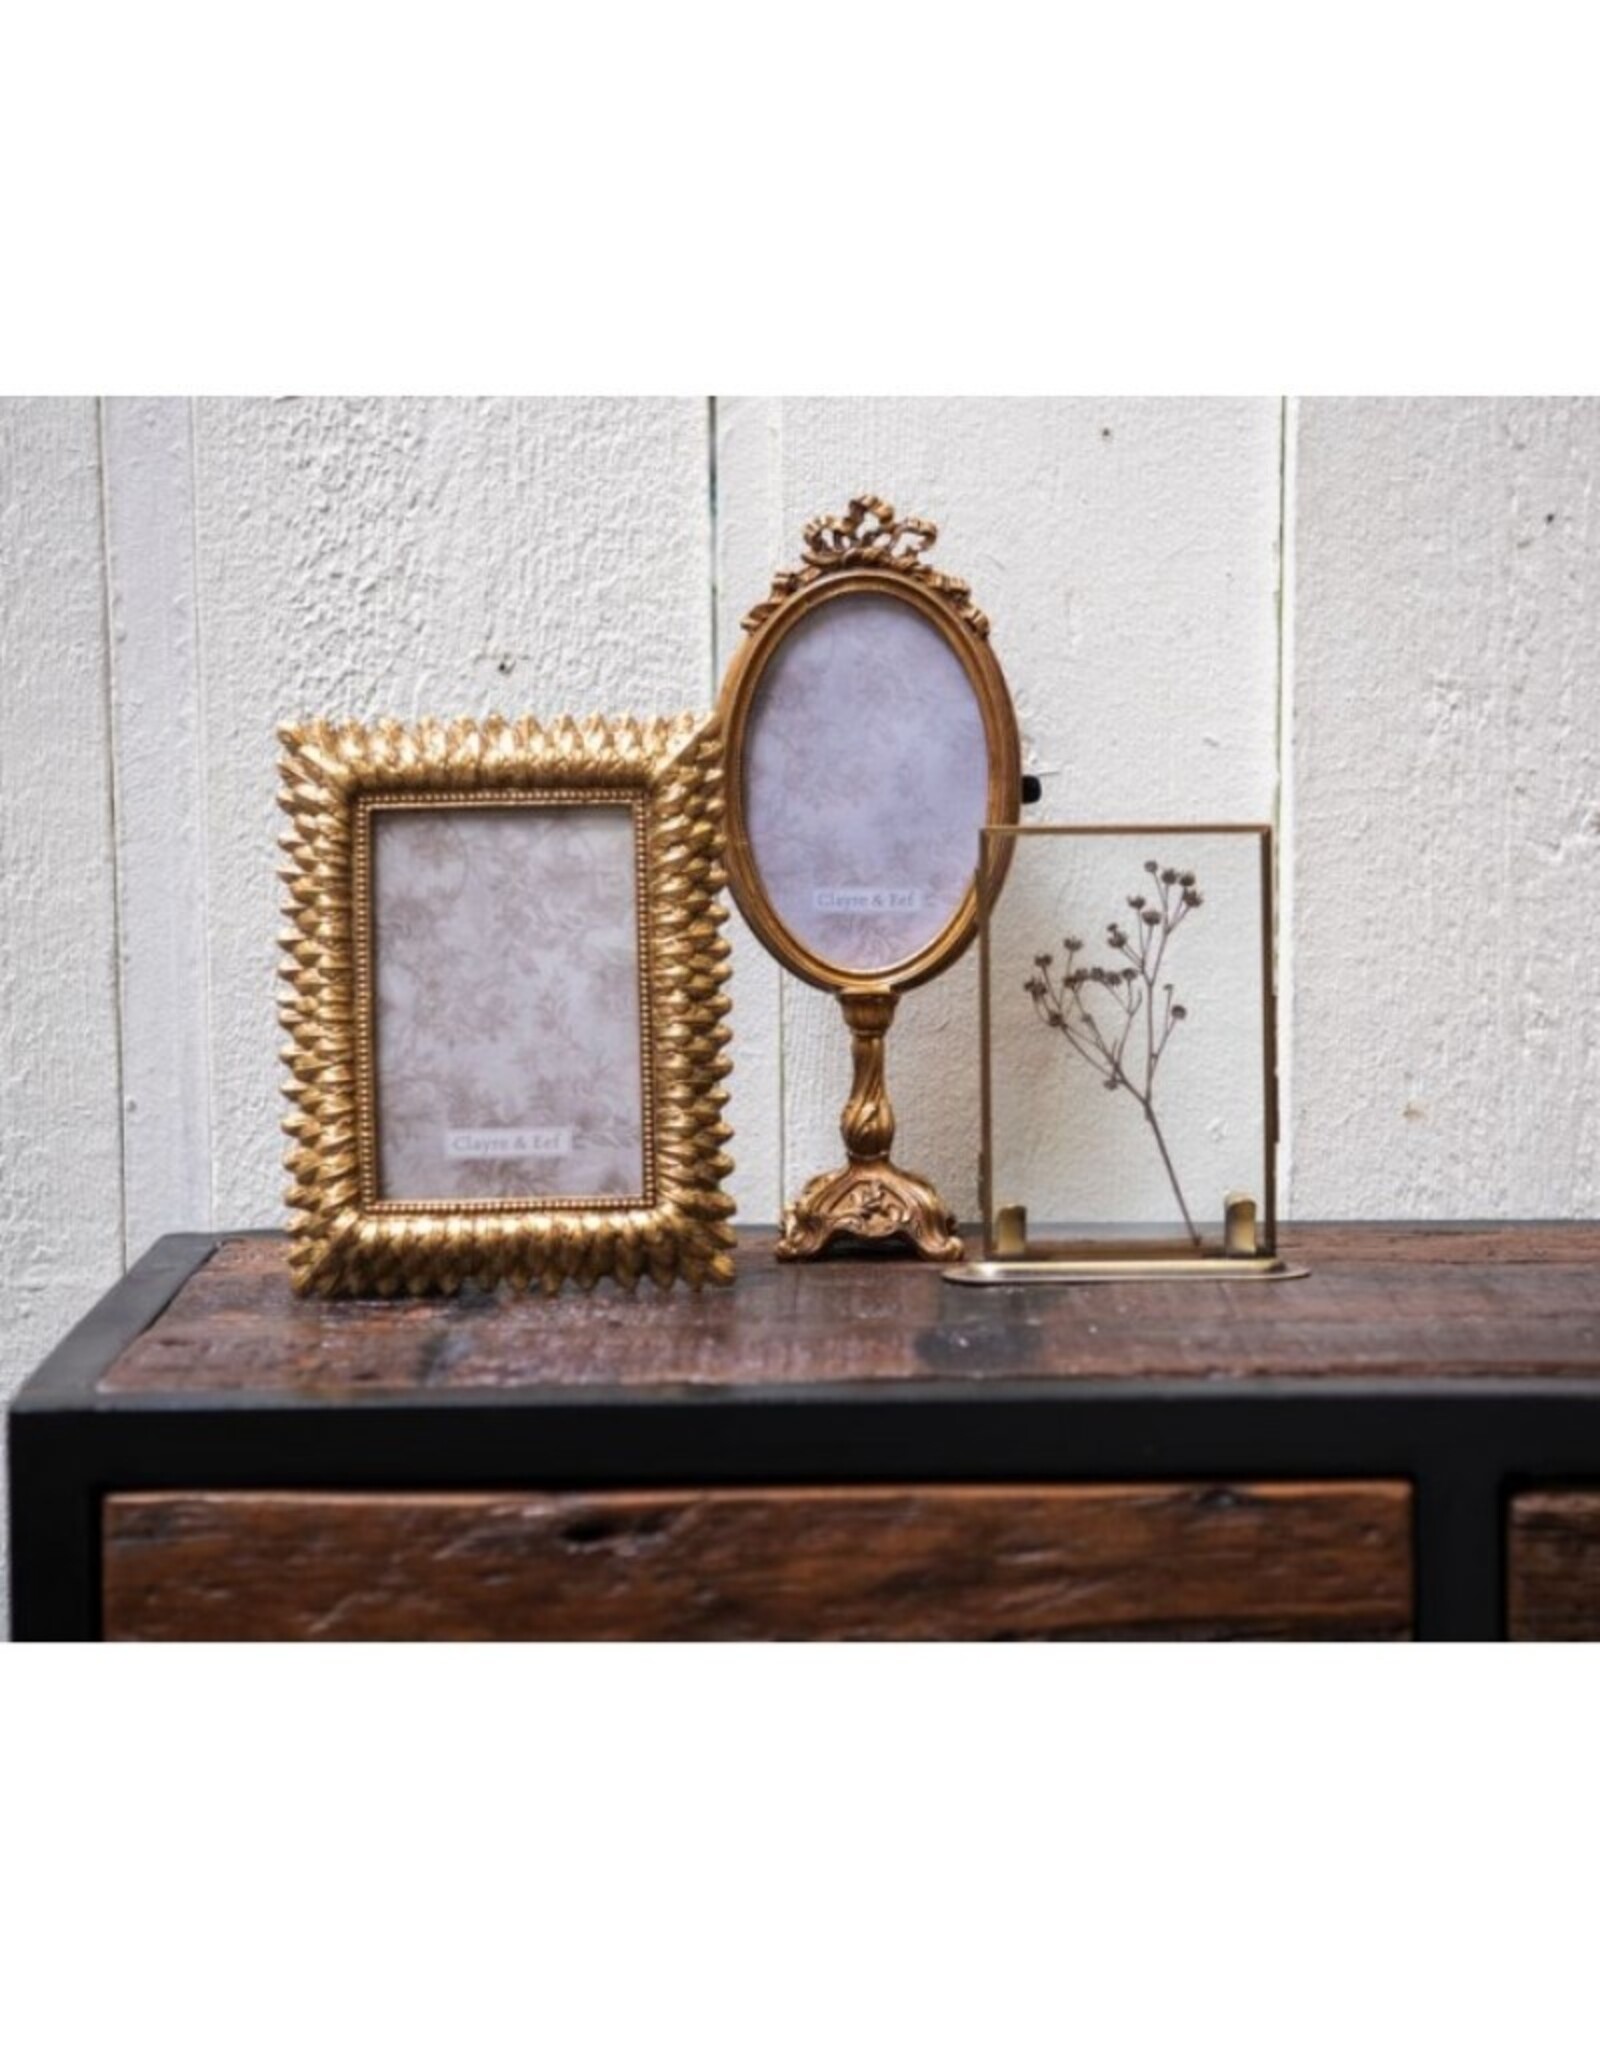 C&E Miscellaneous - Photoframe Baroque style Oval on high footing